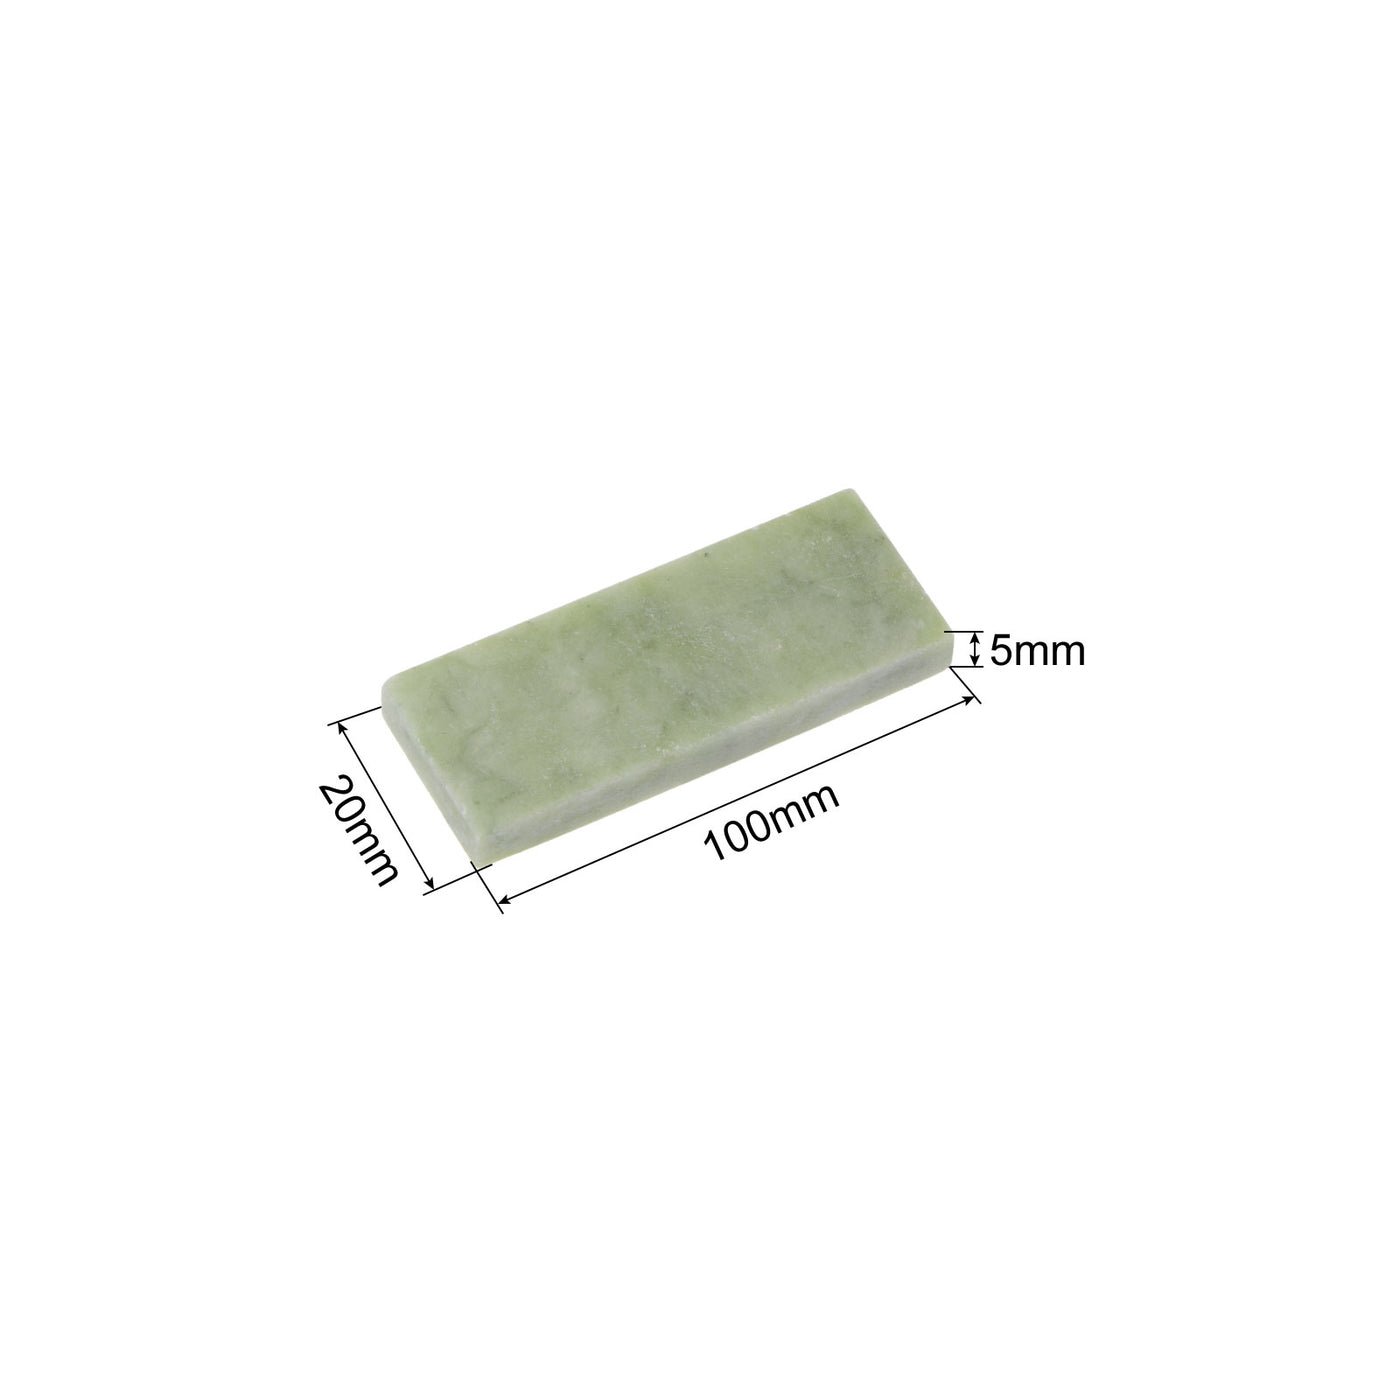 Uxcell Uxcell Sharpening Stones 10000 Grit Green Agate Whetstone 100mm x 25mm x 6mm